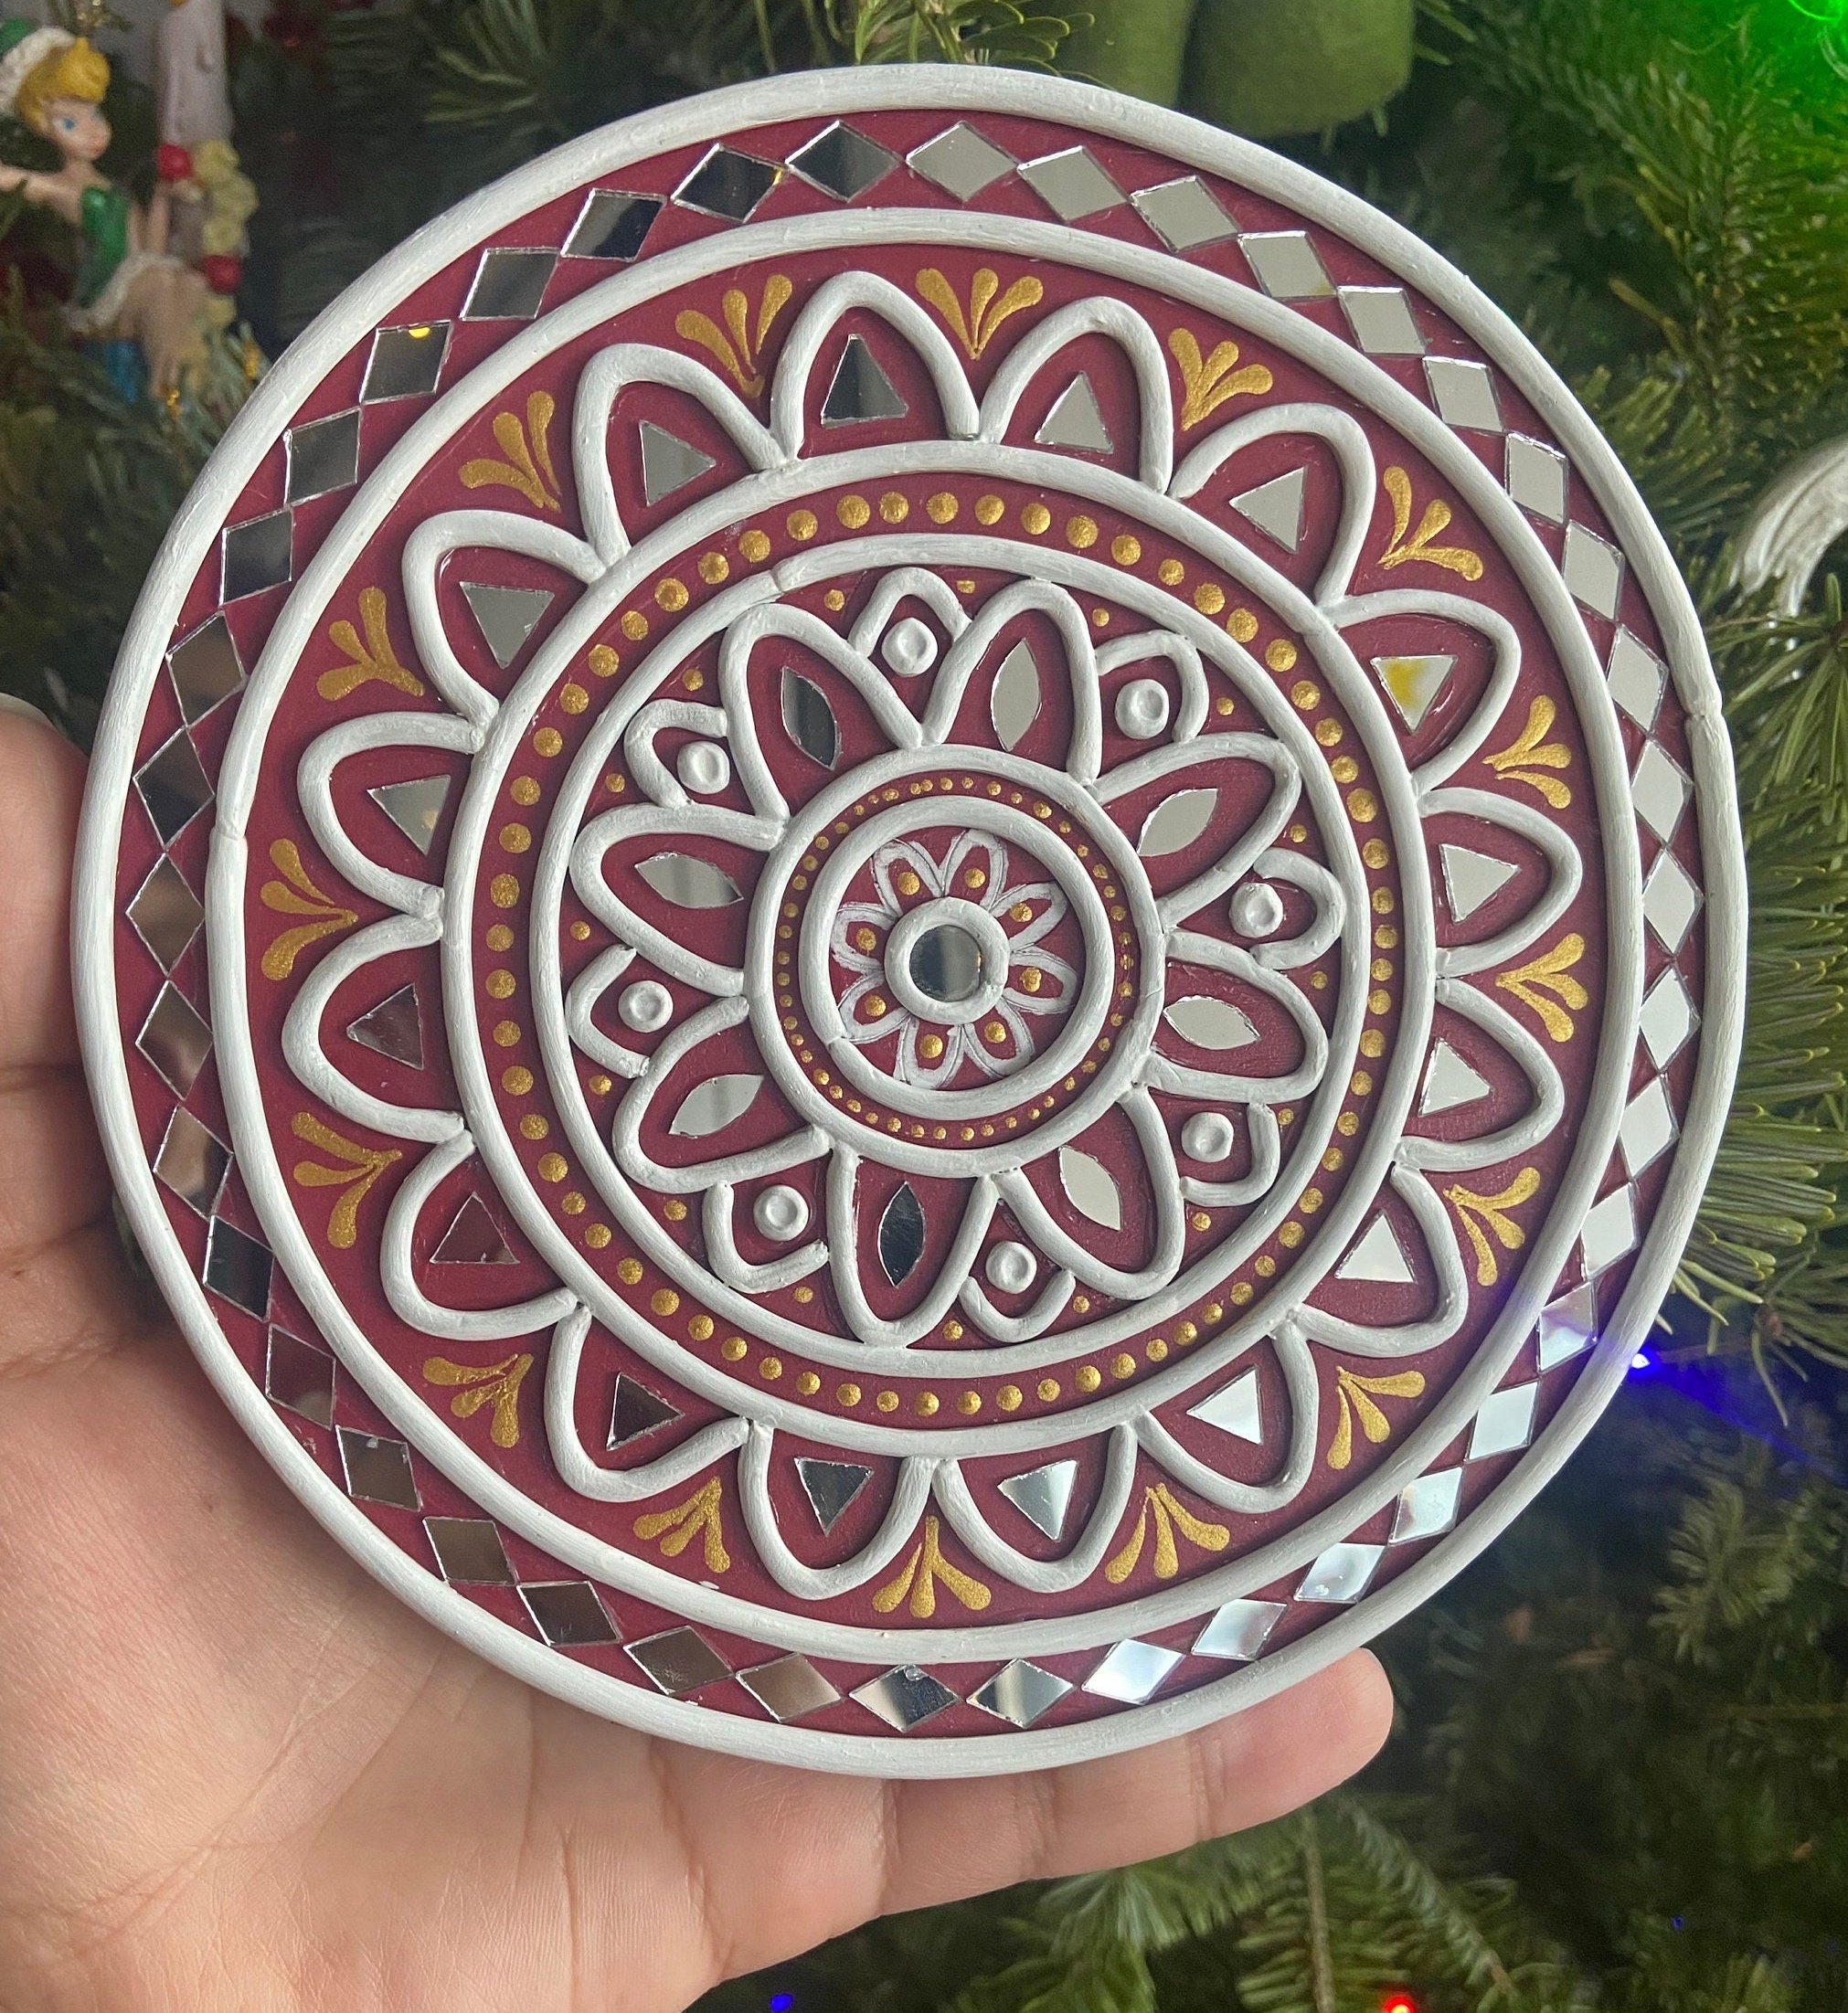 Art o' walls - The simple clay mirror work that I did